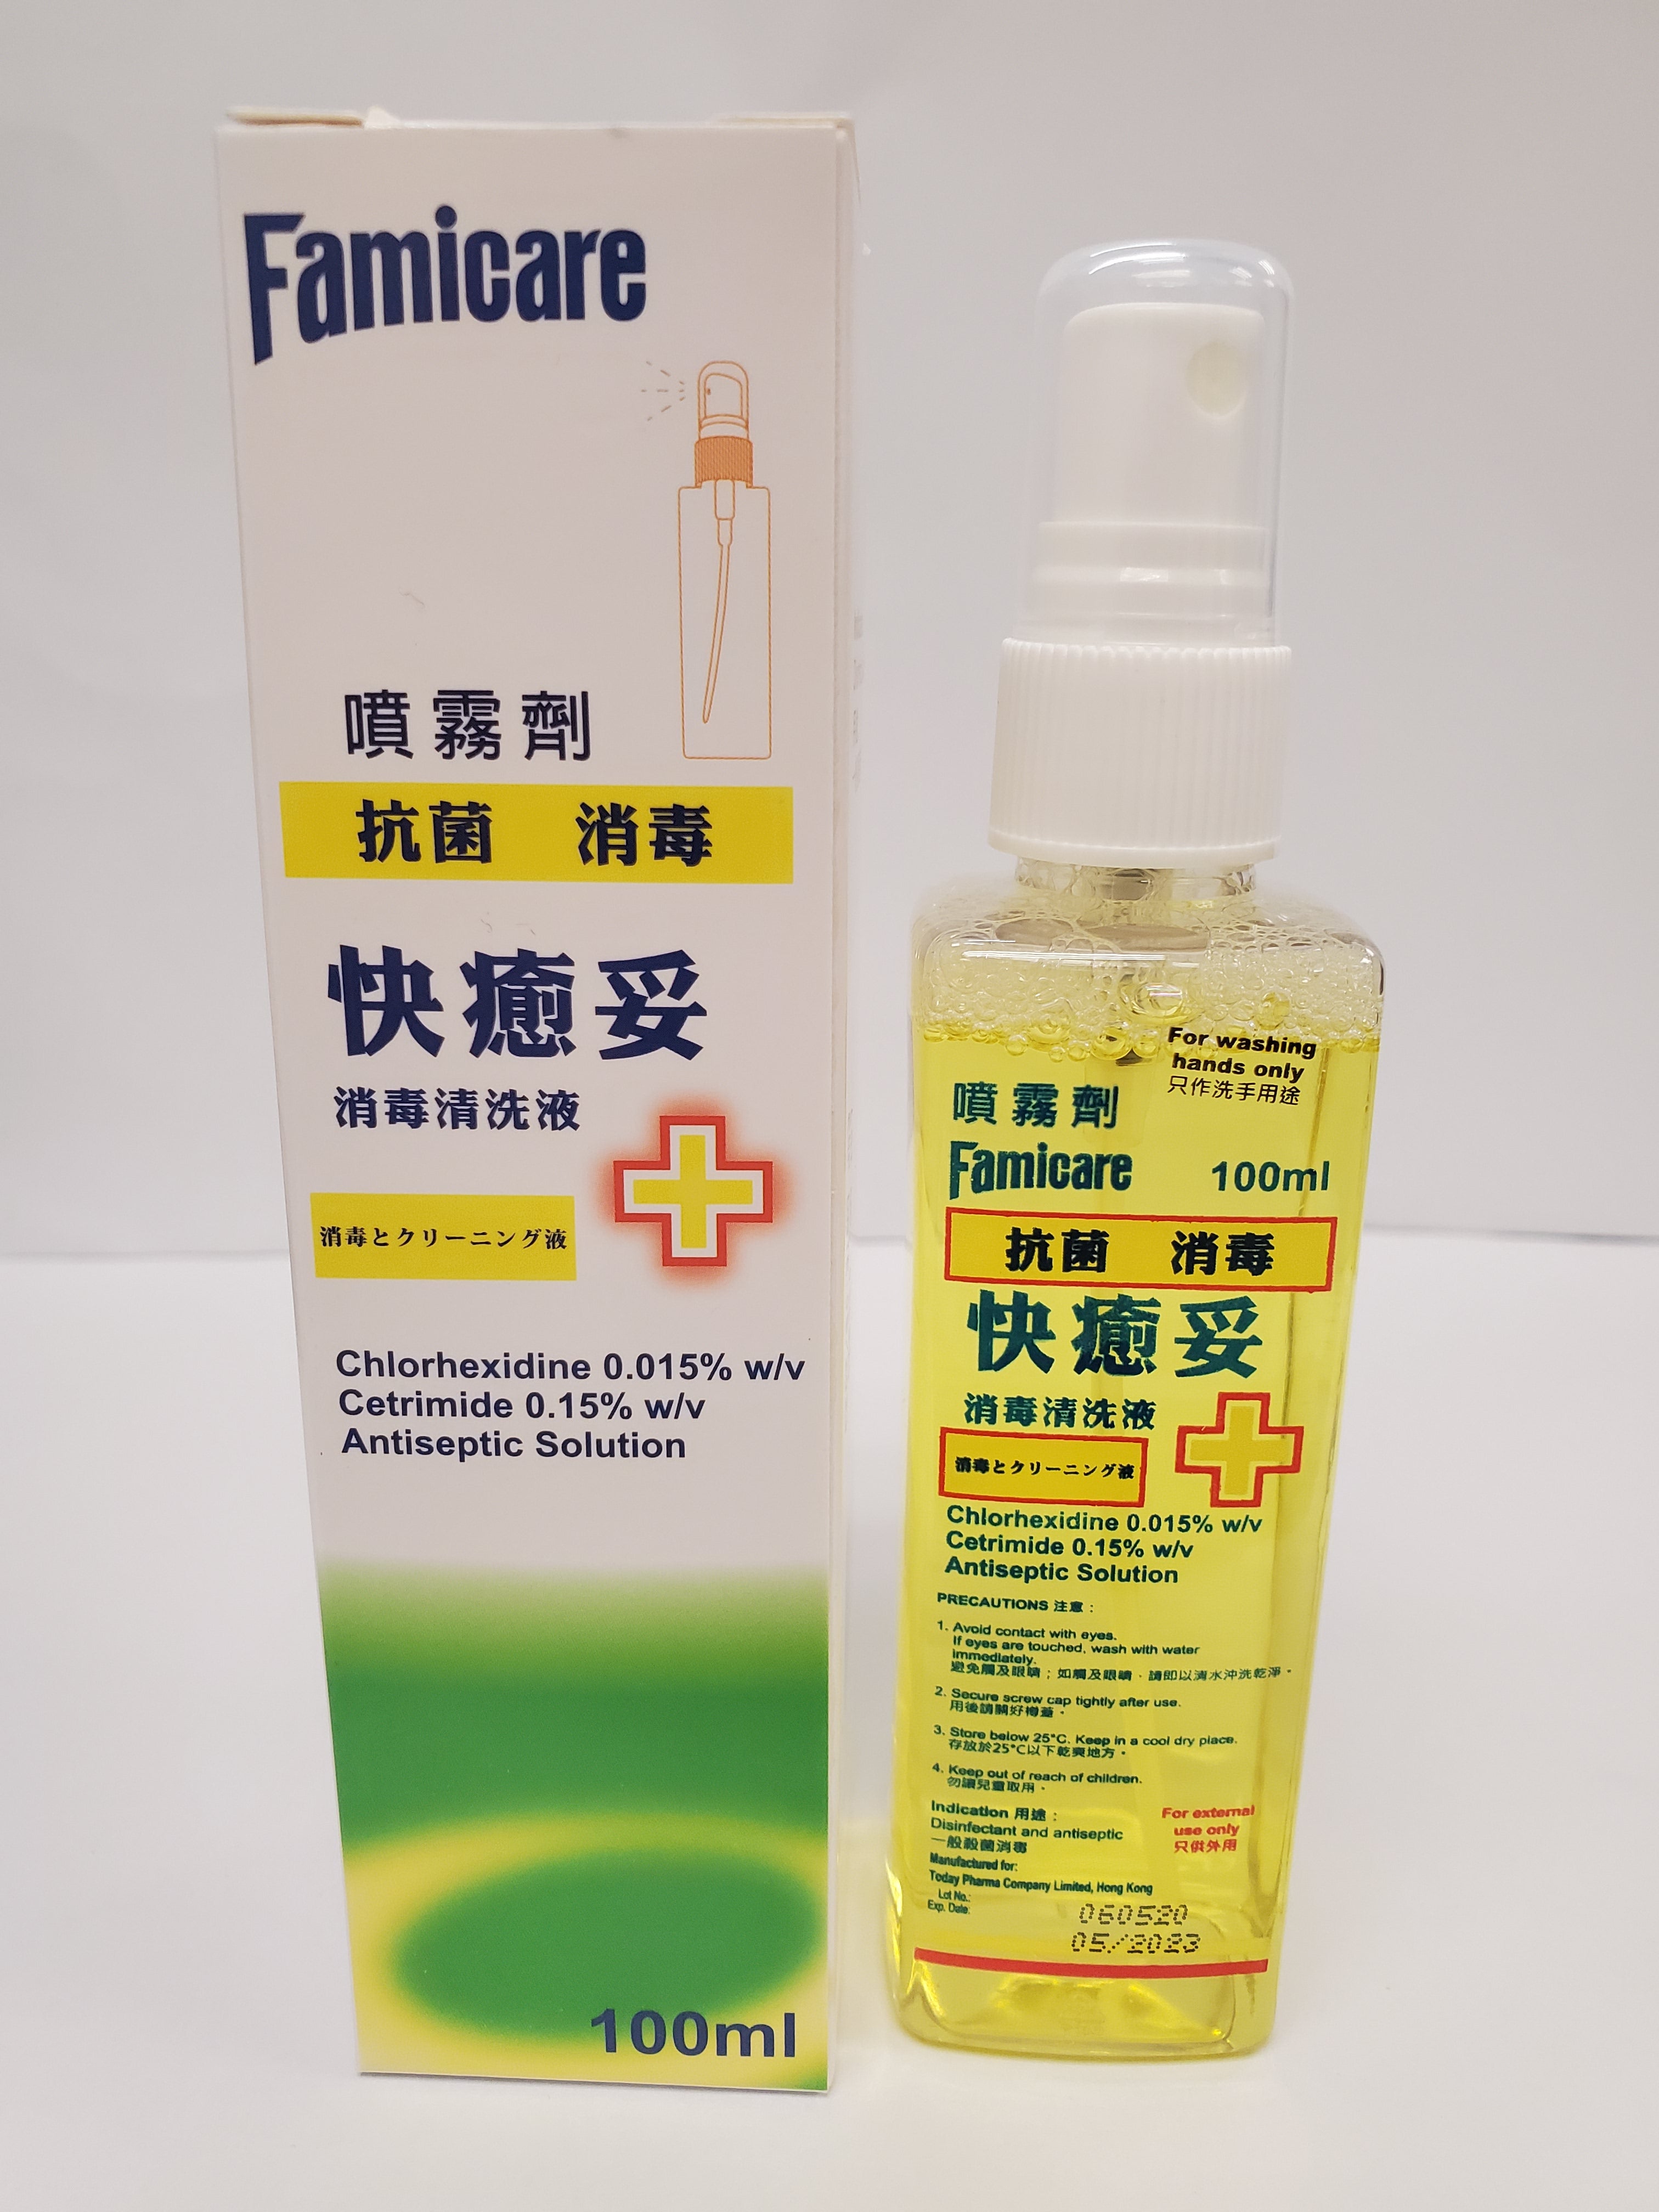 Famicare Antiseptic Solution 100mL